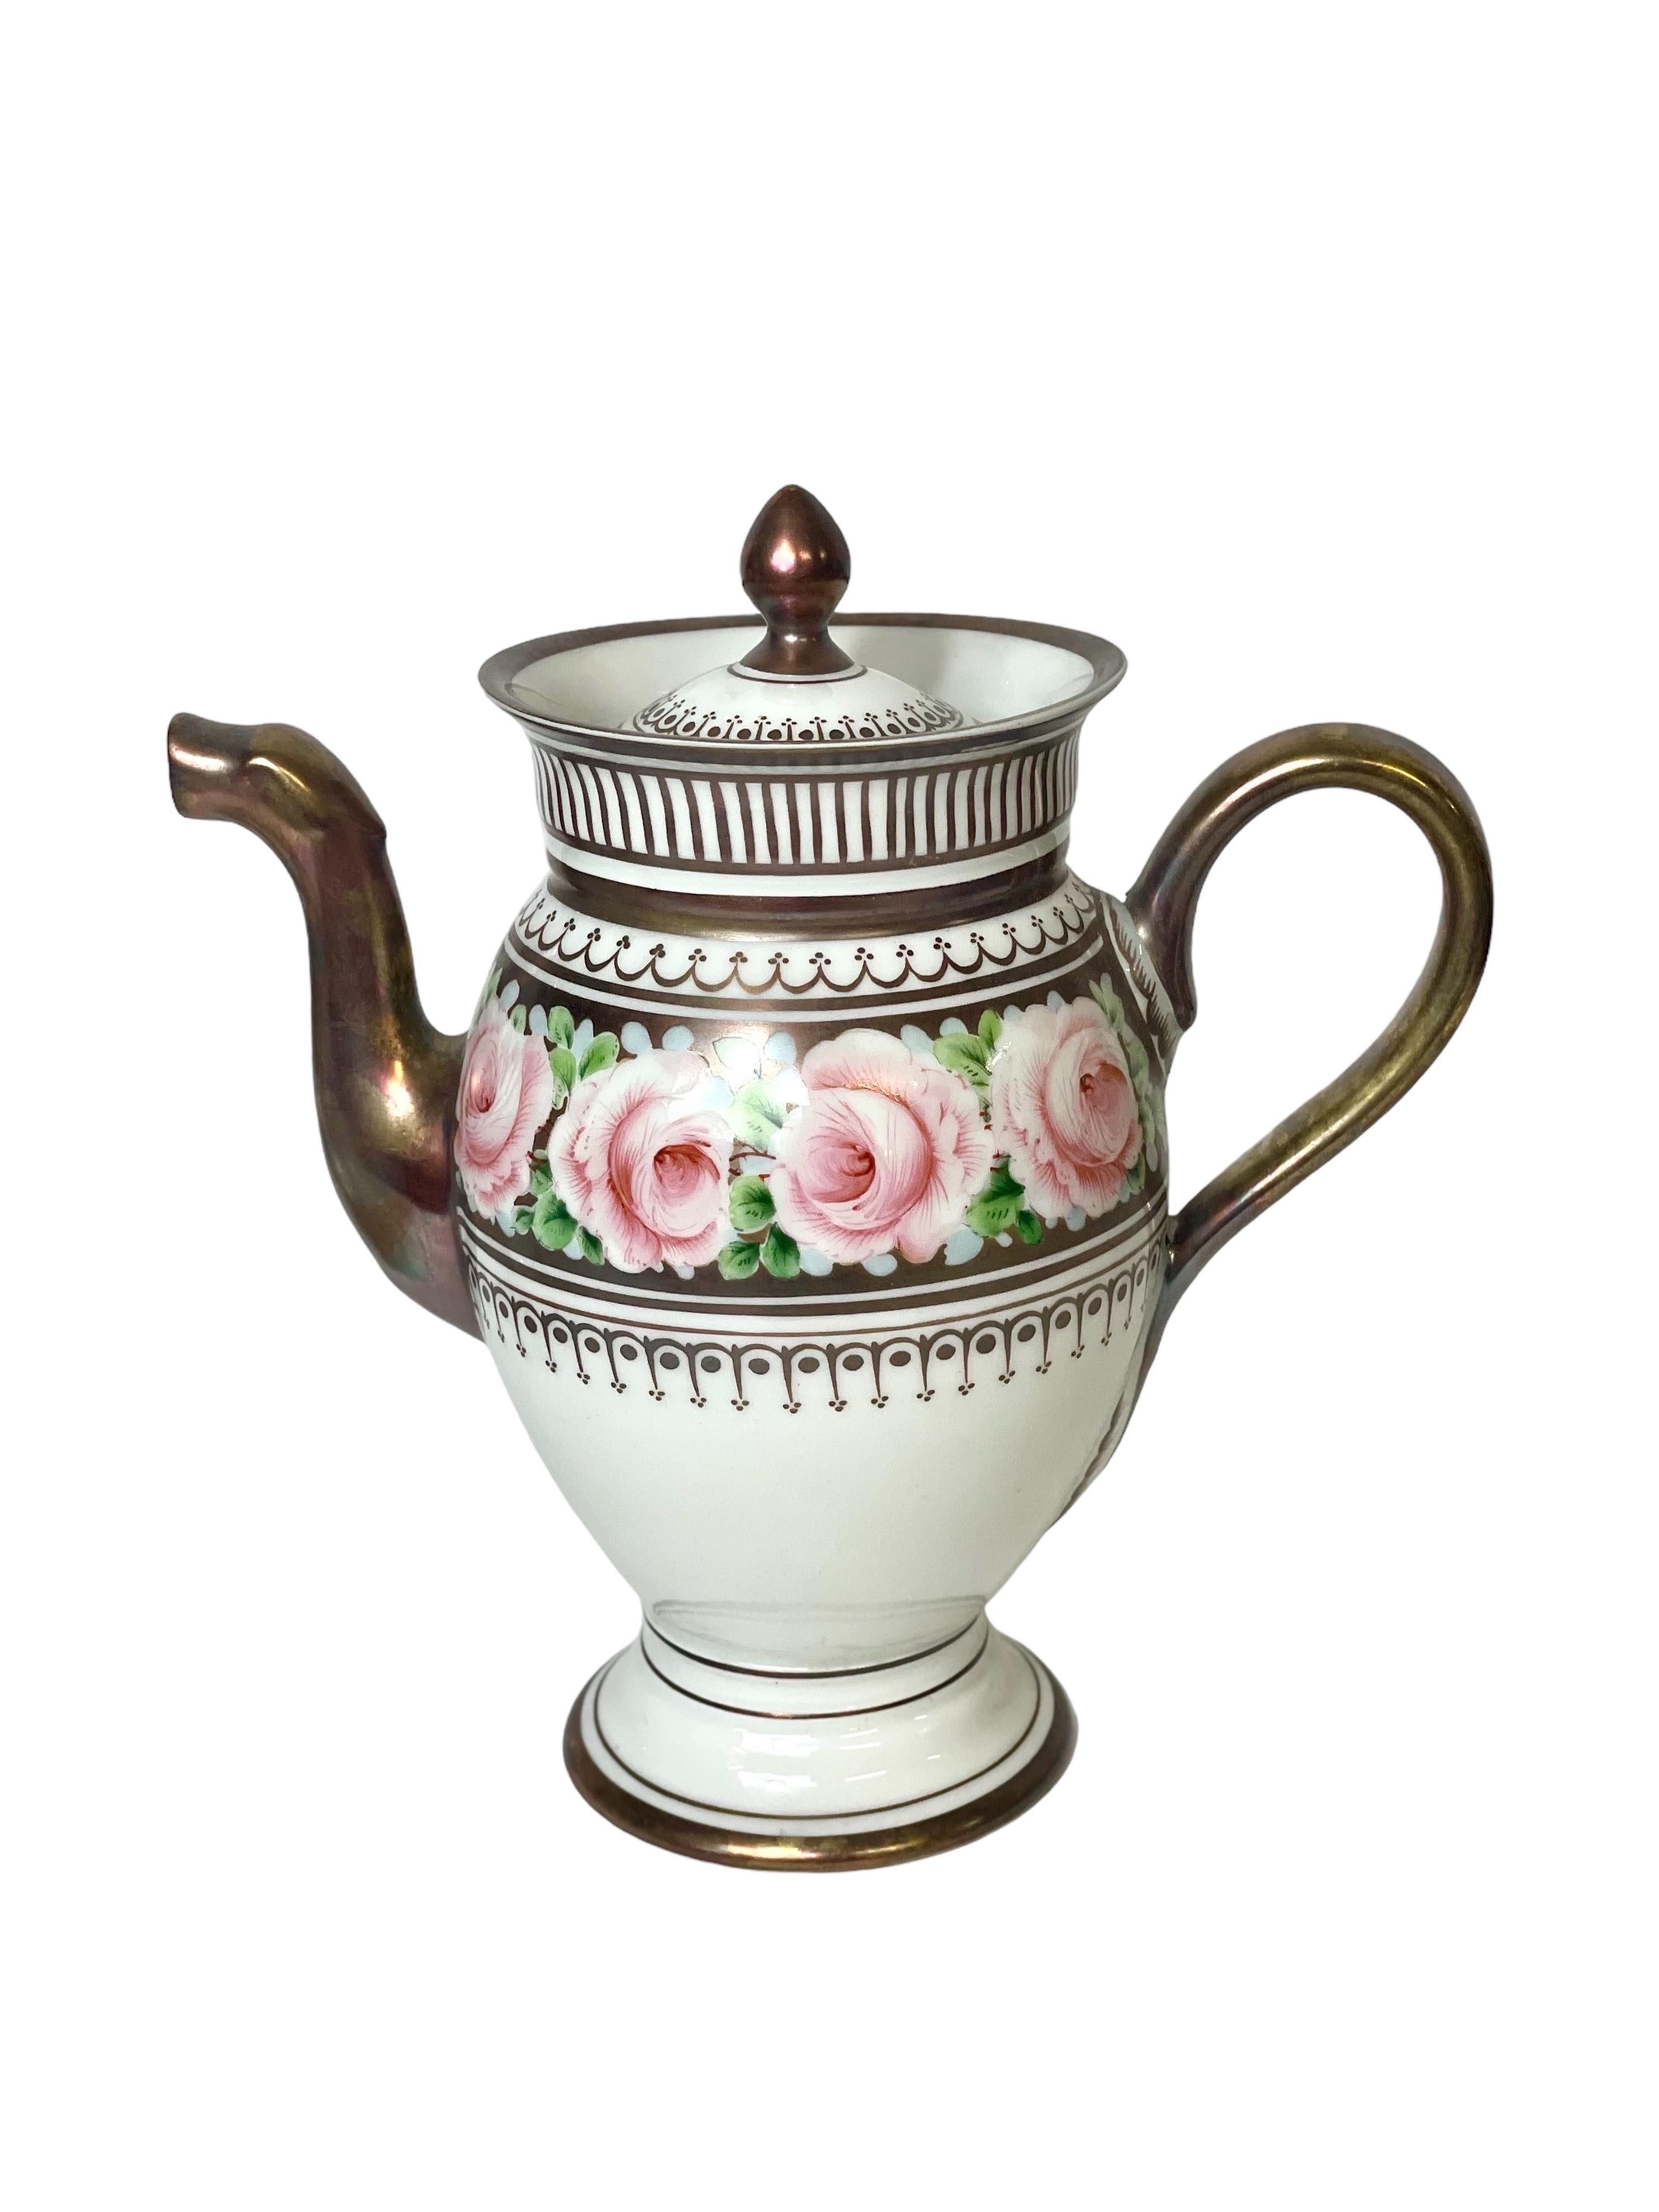 A stunning French Empire style coffee service, dating from around 1950, and comprising a coffee pot, six cups and saucers, a lidded sugar bowl and a cream jug. Crafted from white and silvered porcelain, each piece features a polychrome decoration of